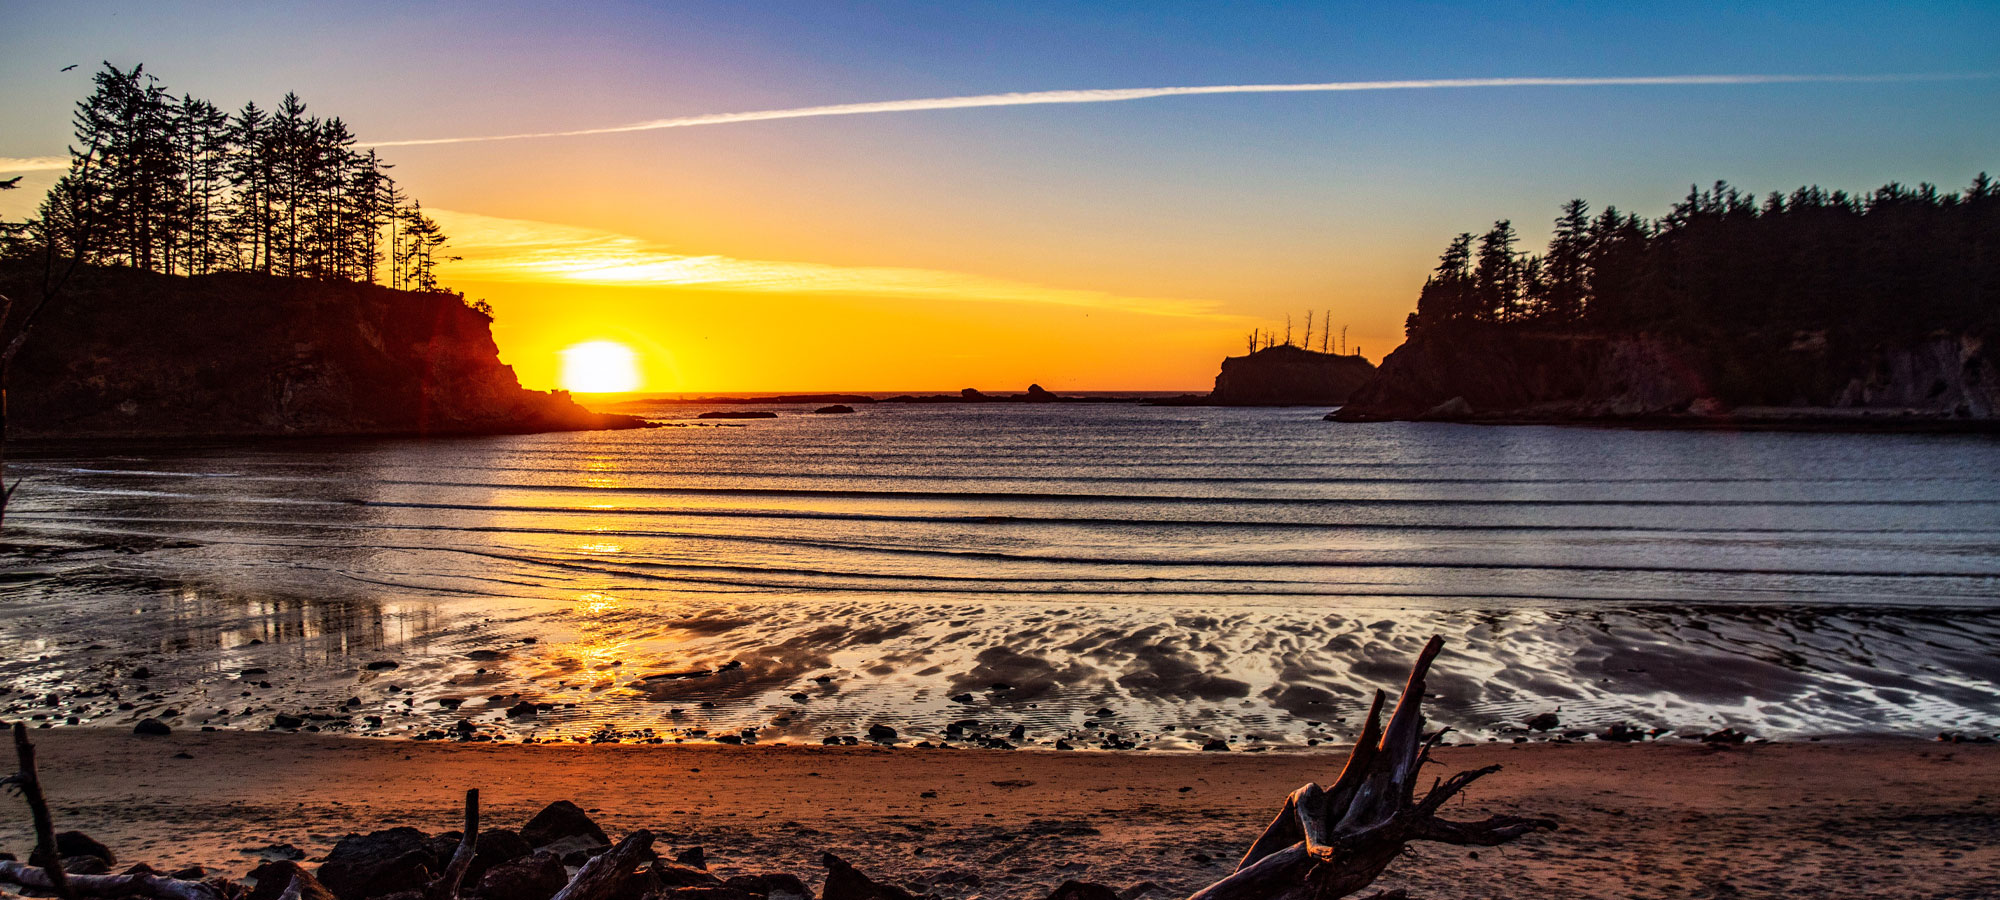 5 Ways to Cool Off on Oregon’s Adventure Coast: Coos Bay, North Bend ...